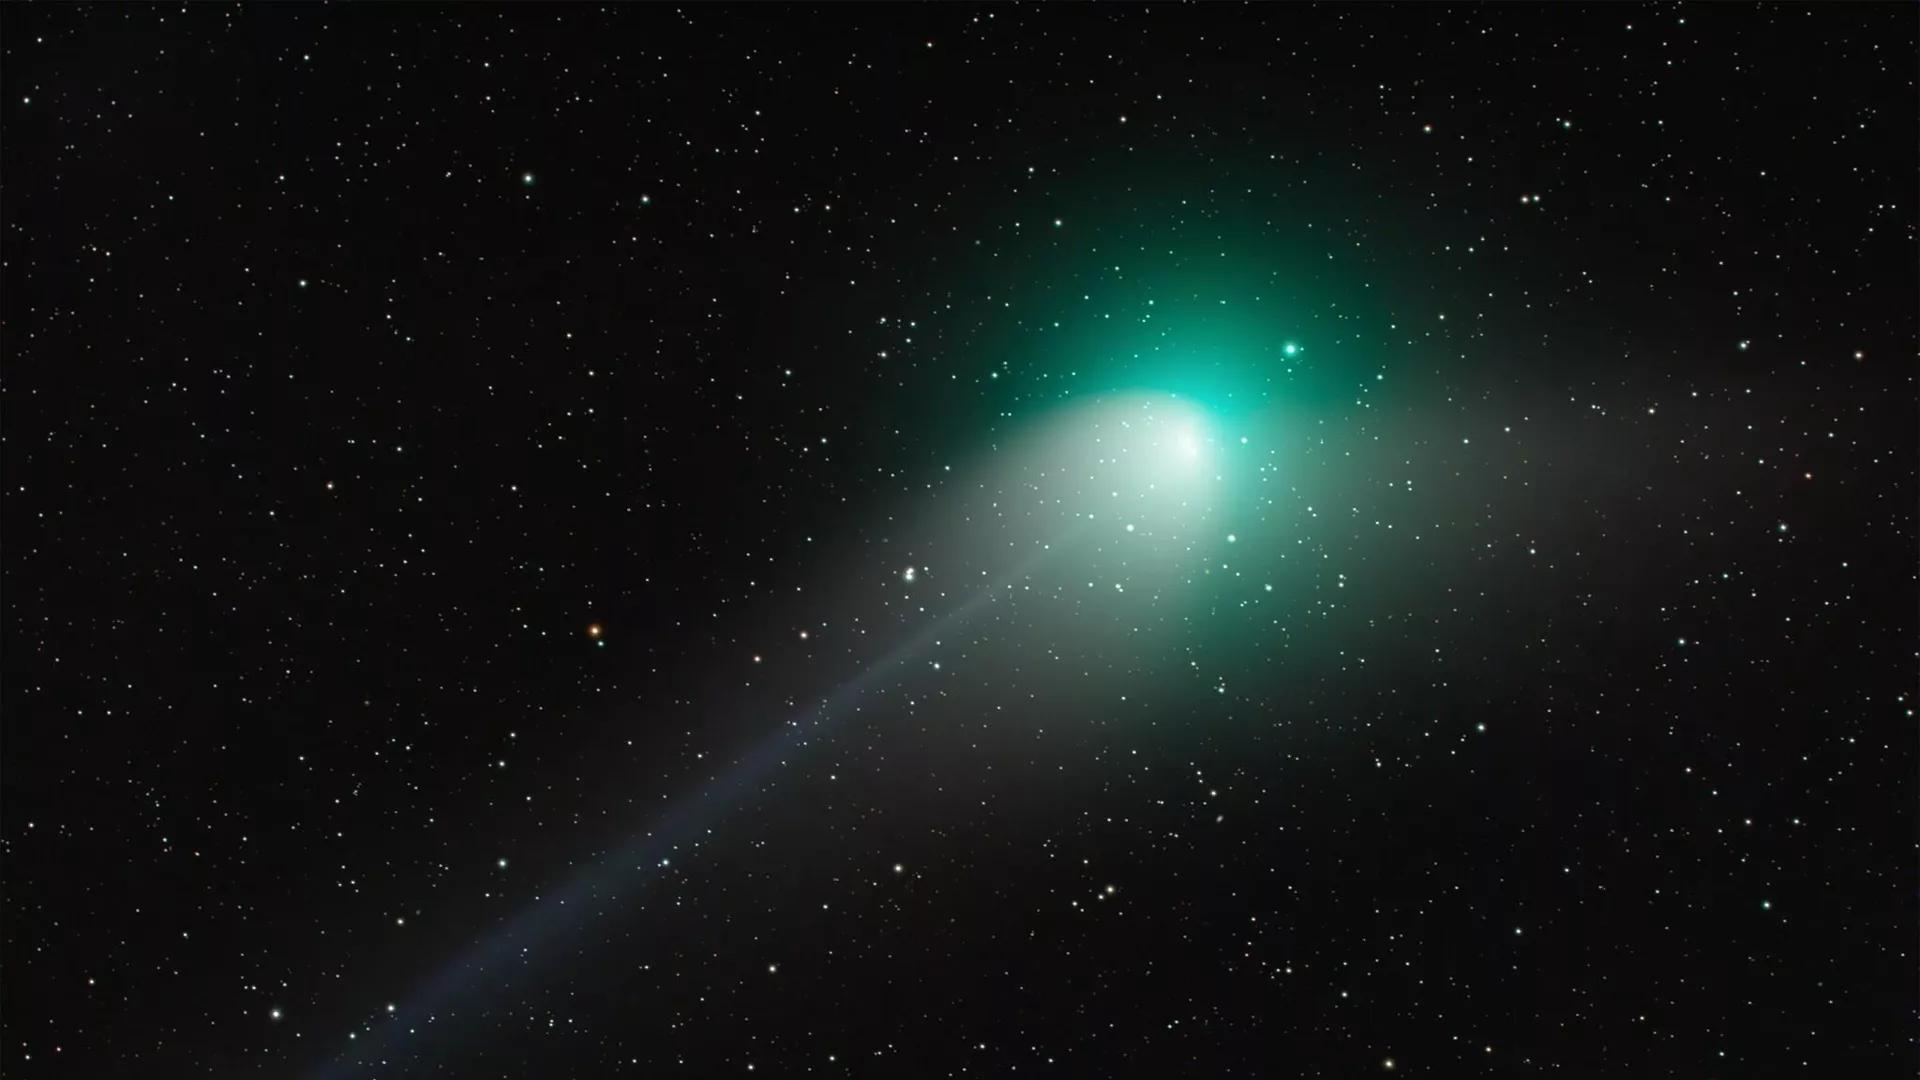 Stunning Fluorescent Green Comet ZTF Makes Its Closest Approach to Earth